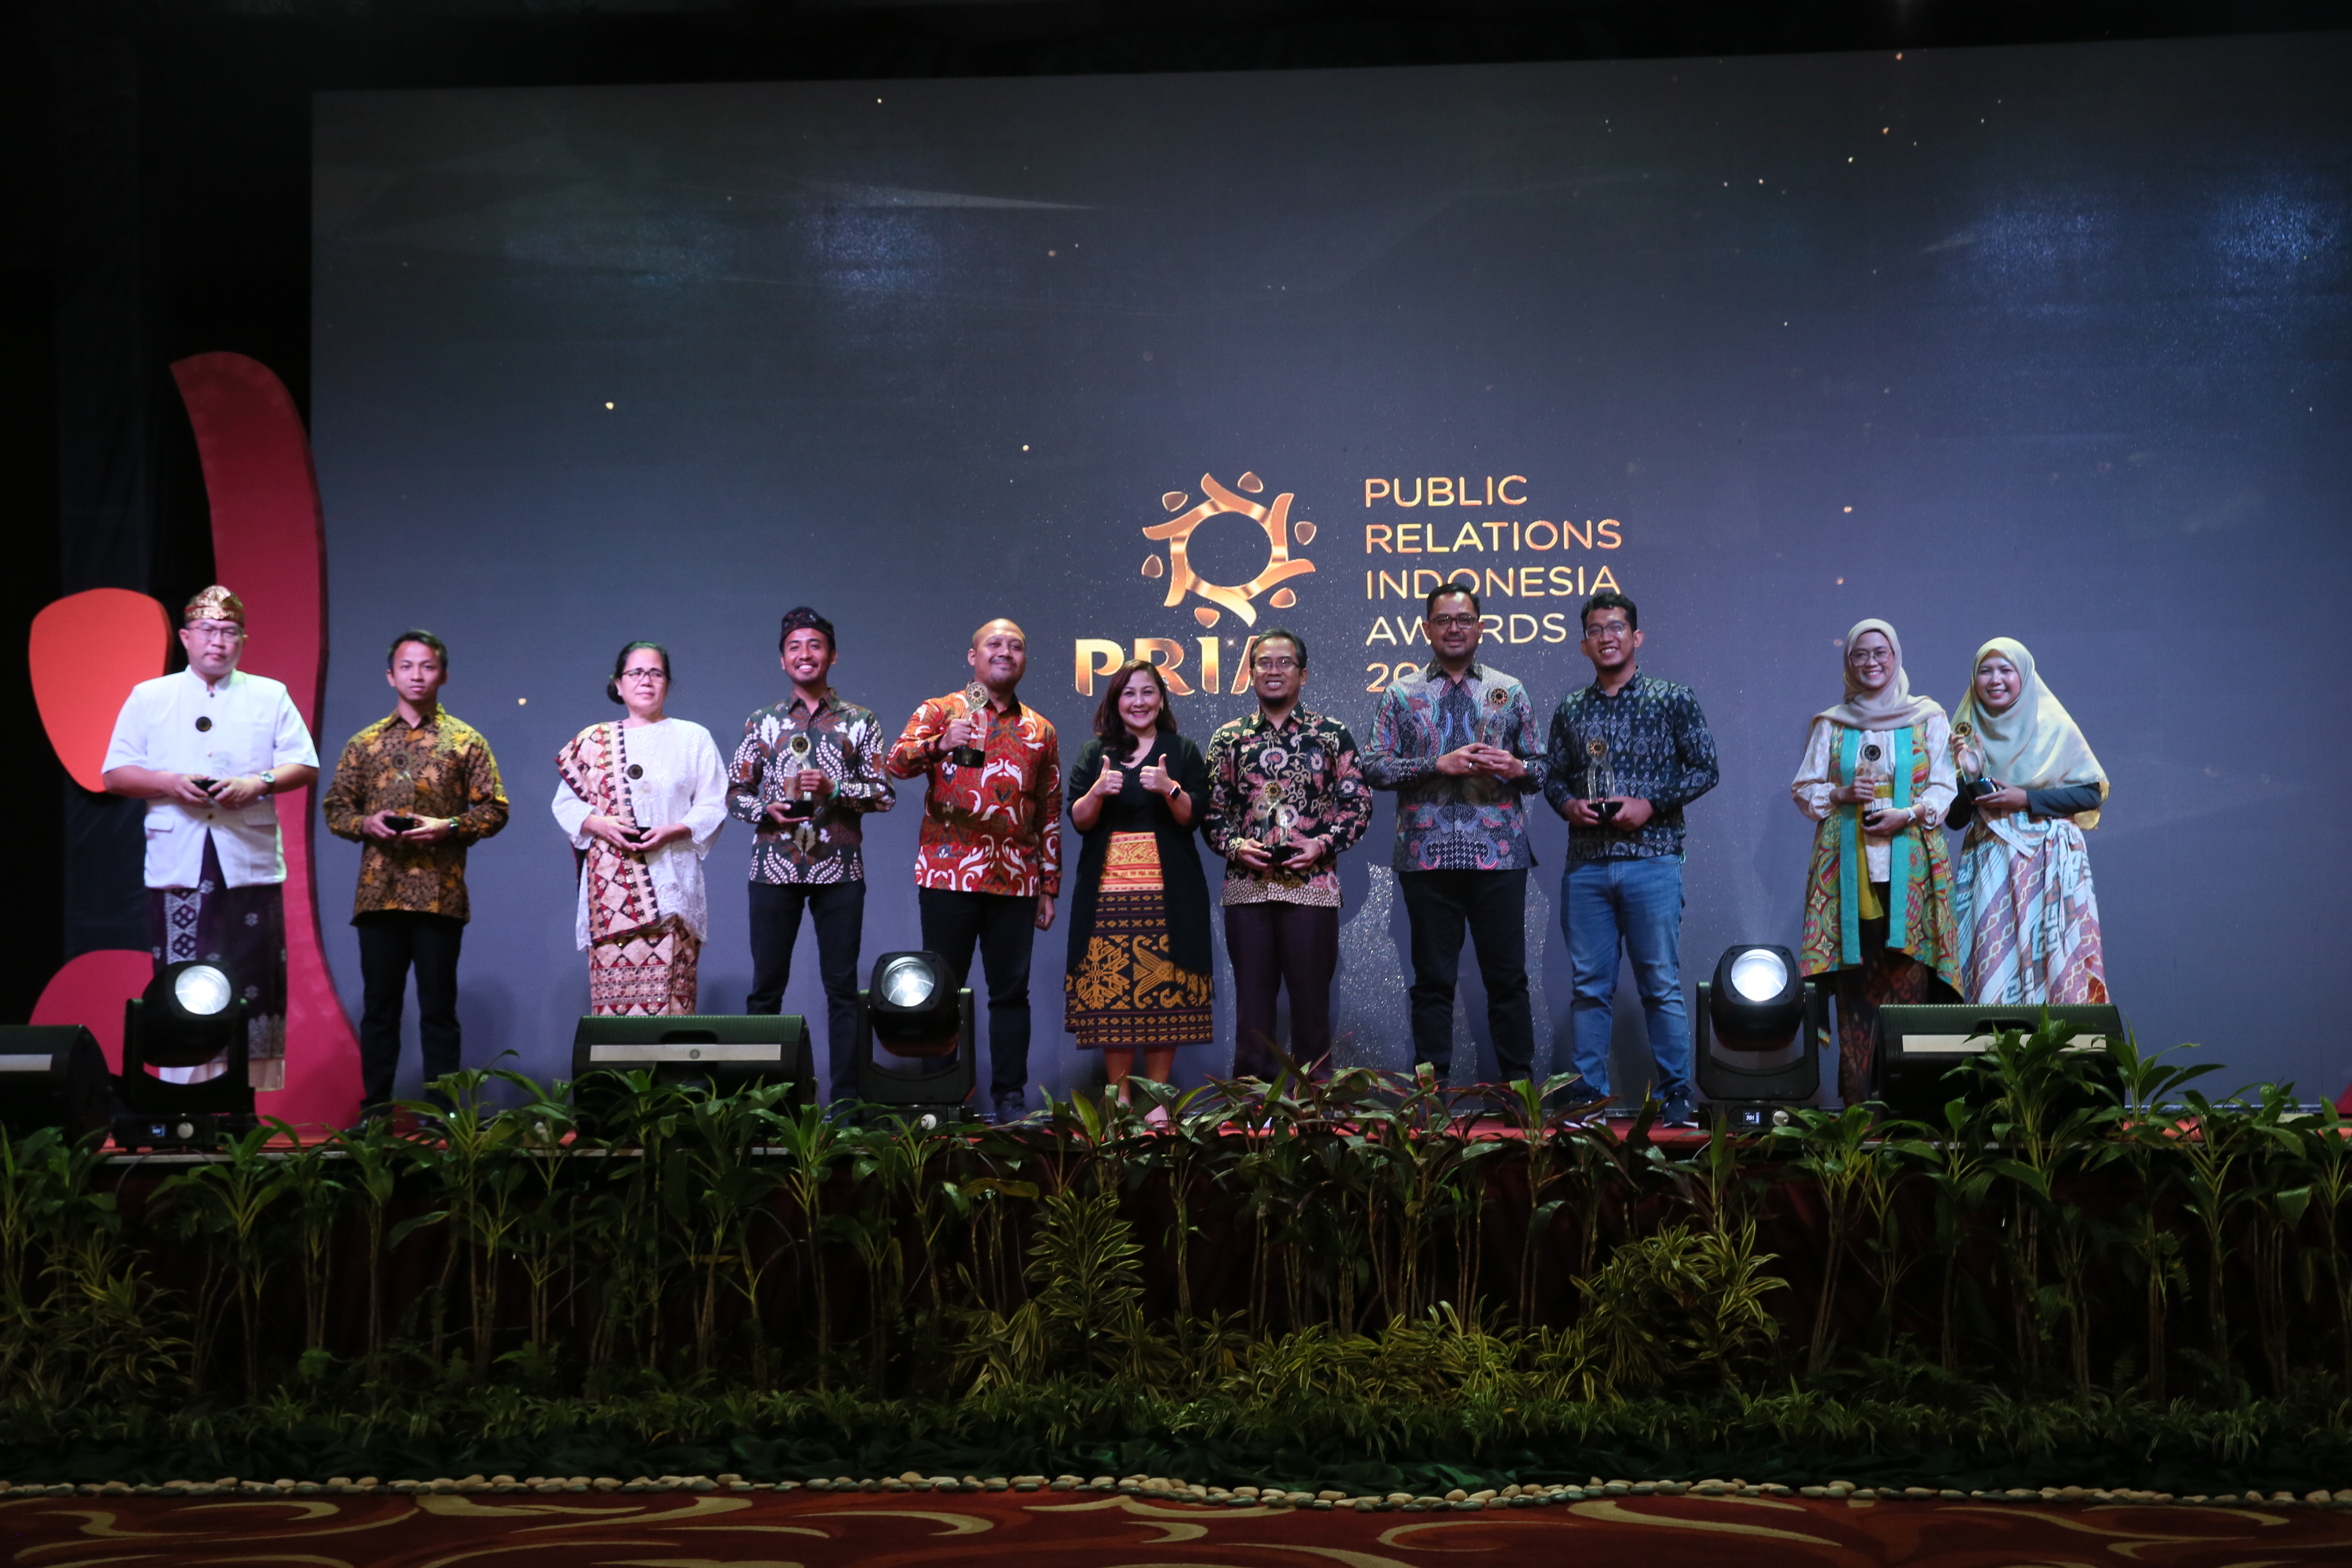 Award presentation at the 2023 Public Relations Indonesia Award event to the winners.